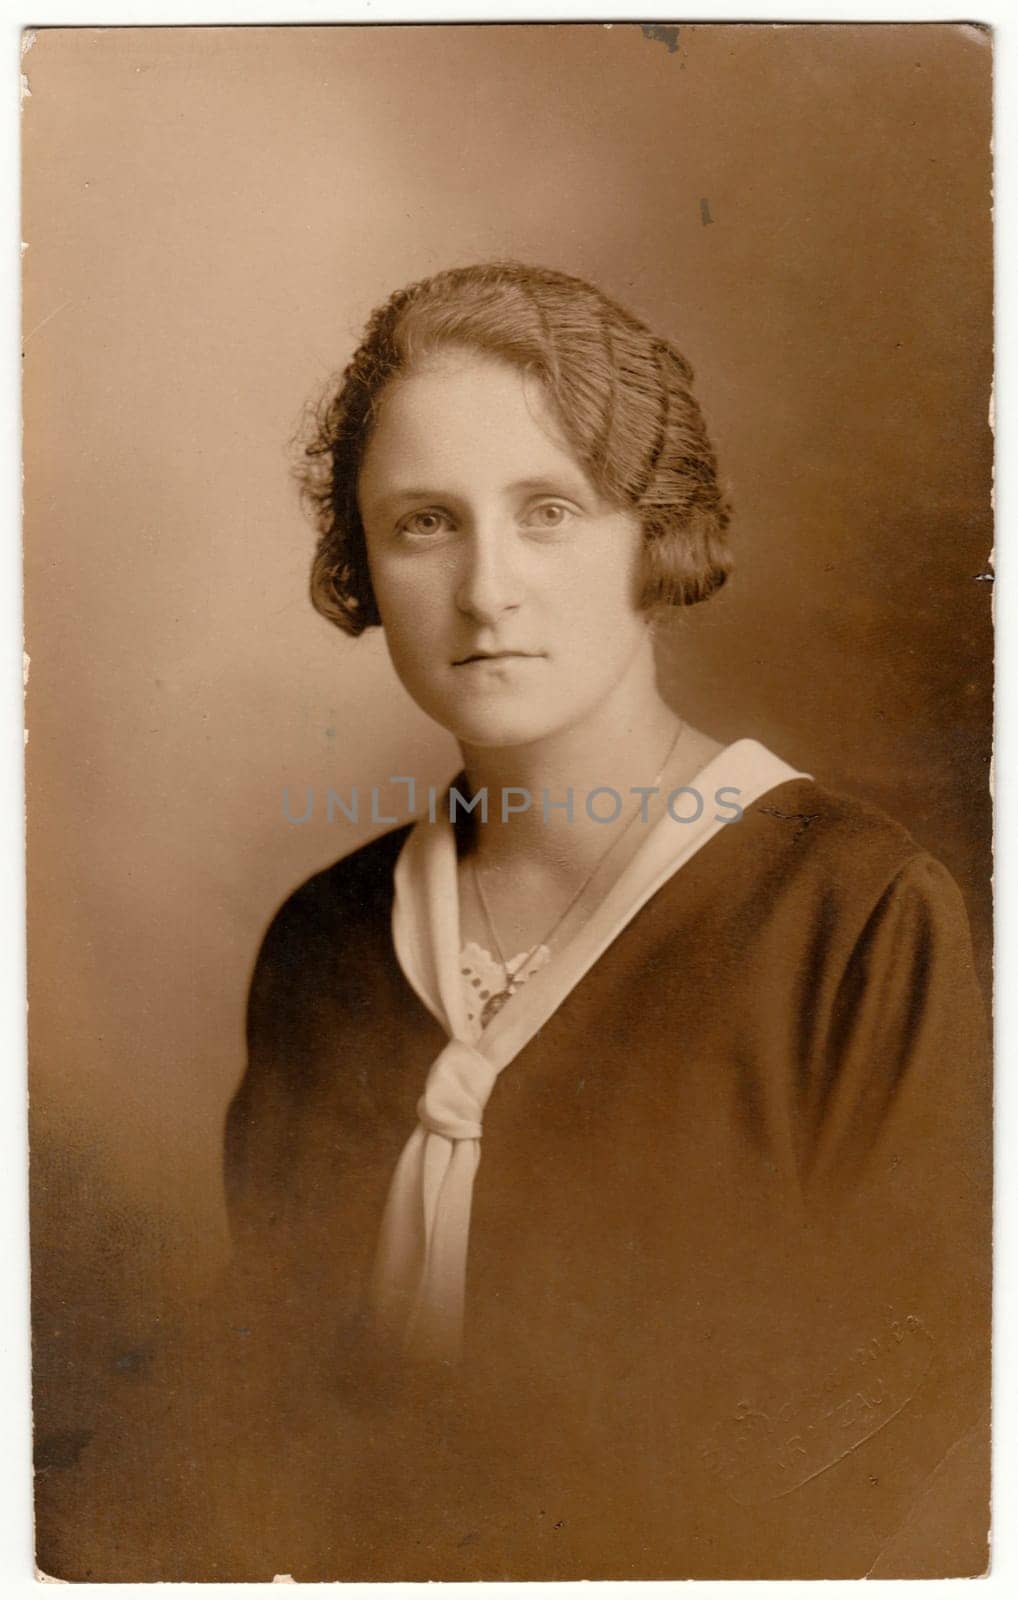 GERMANY - CIRCA 1930s: Vintage photo shows woman - portrait. Retro black and white studio photography with sepia effect.